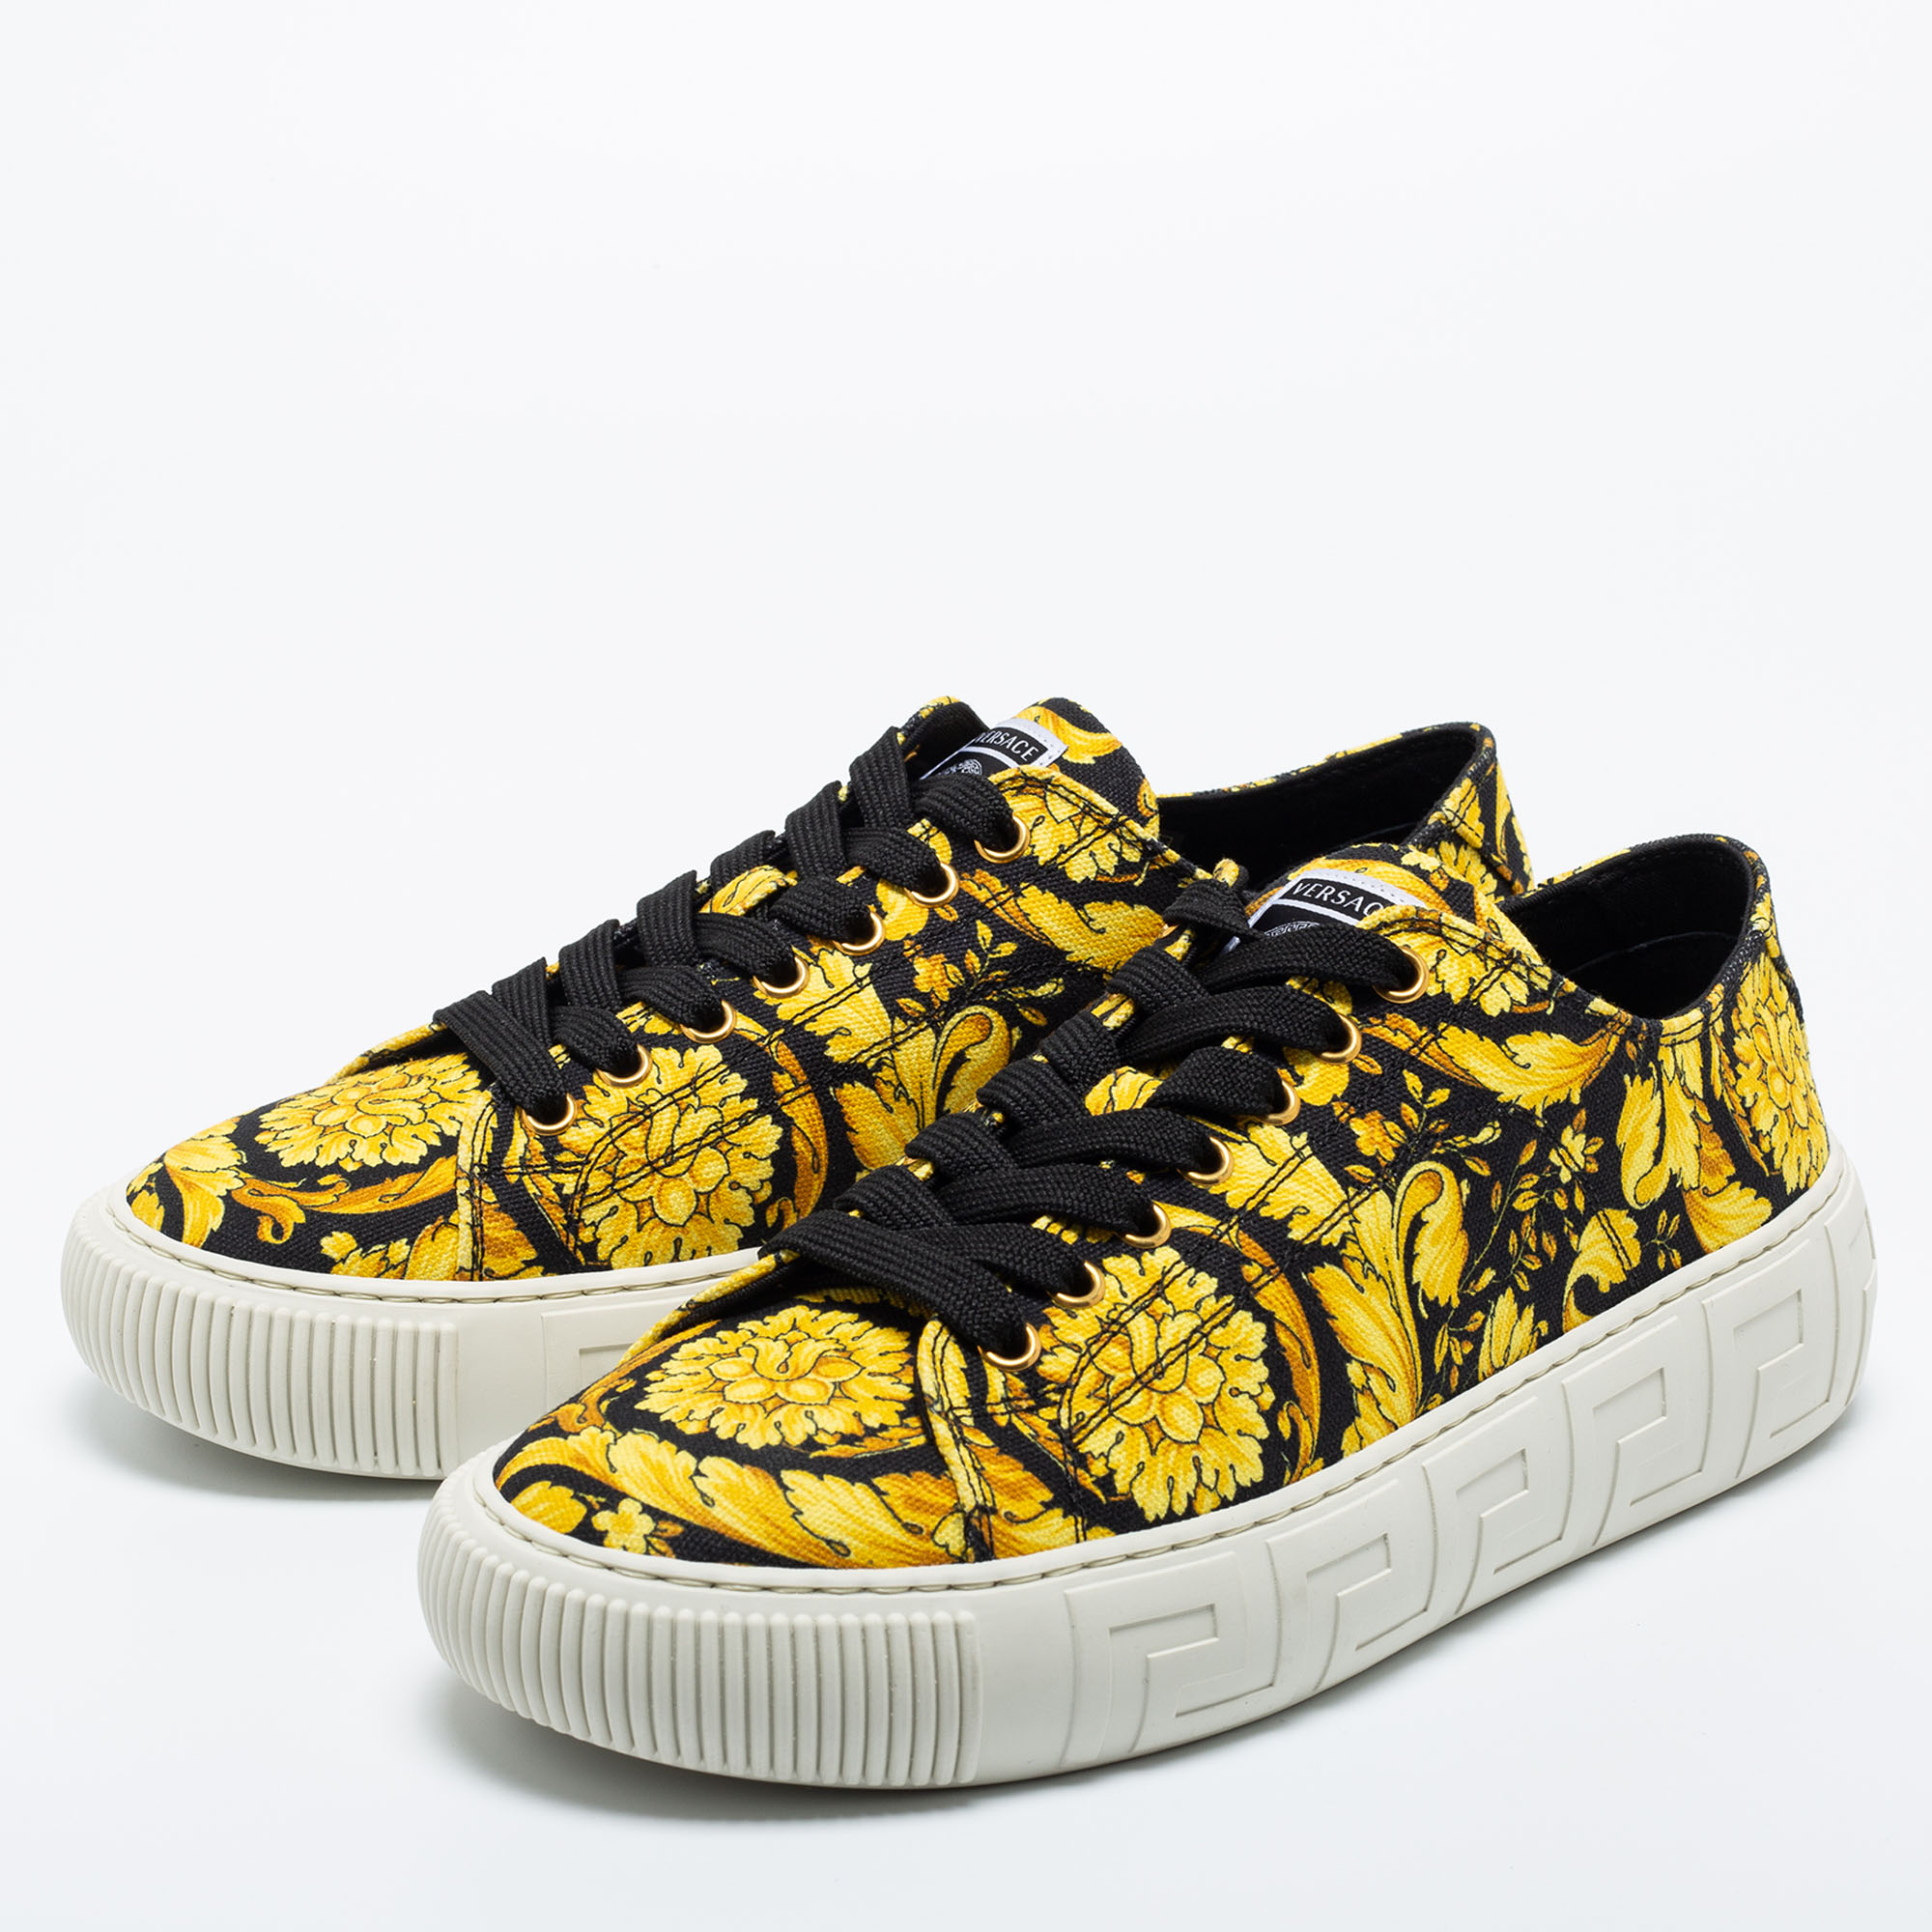 

Versace Black/Yellow Barocco Print Canvas Low Top Sneakers Size